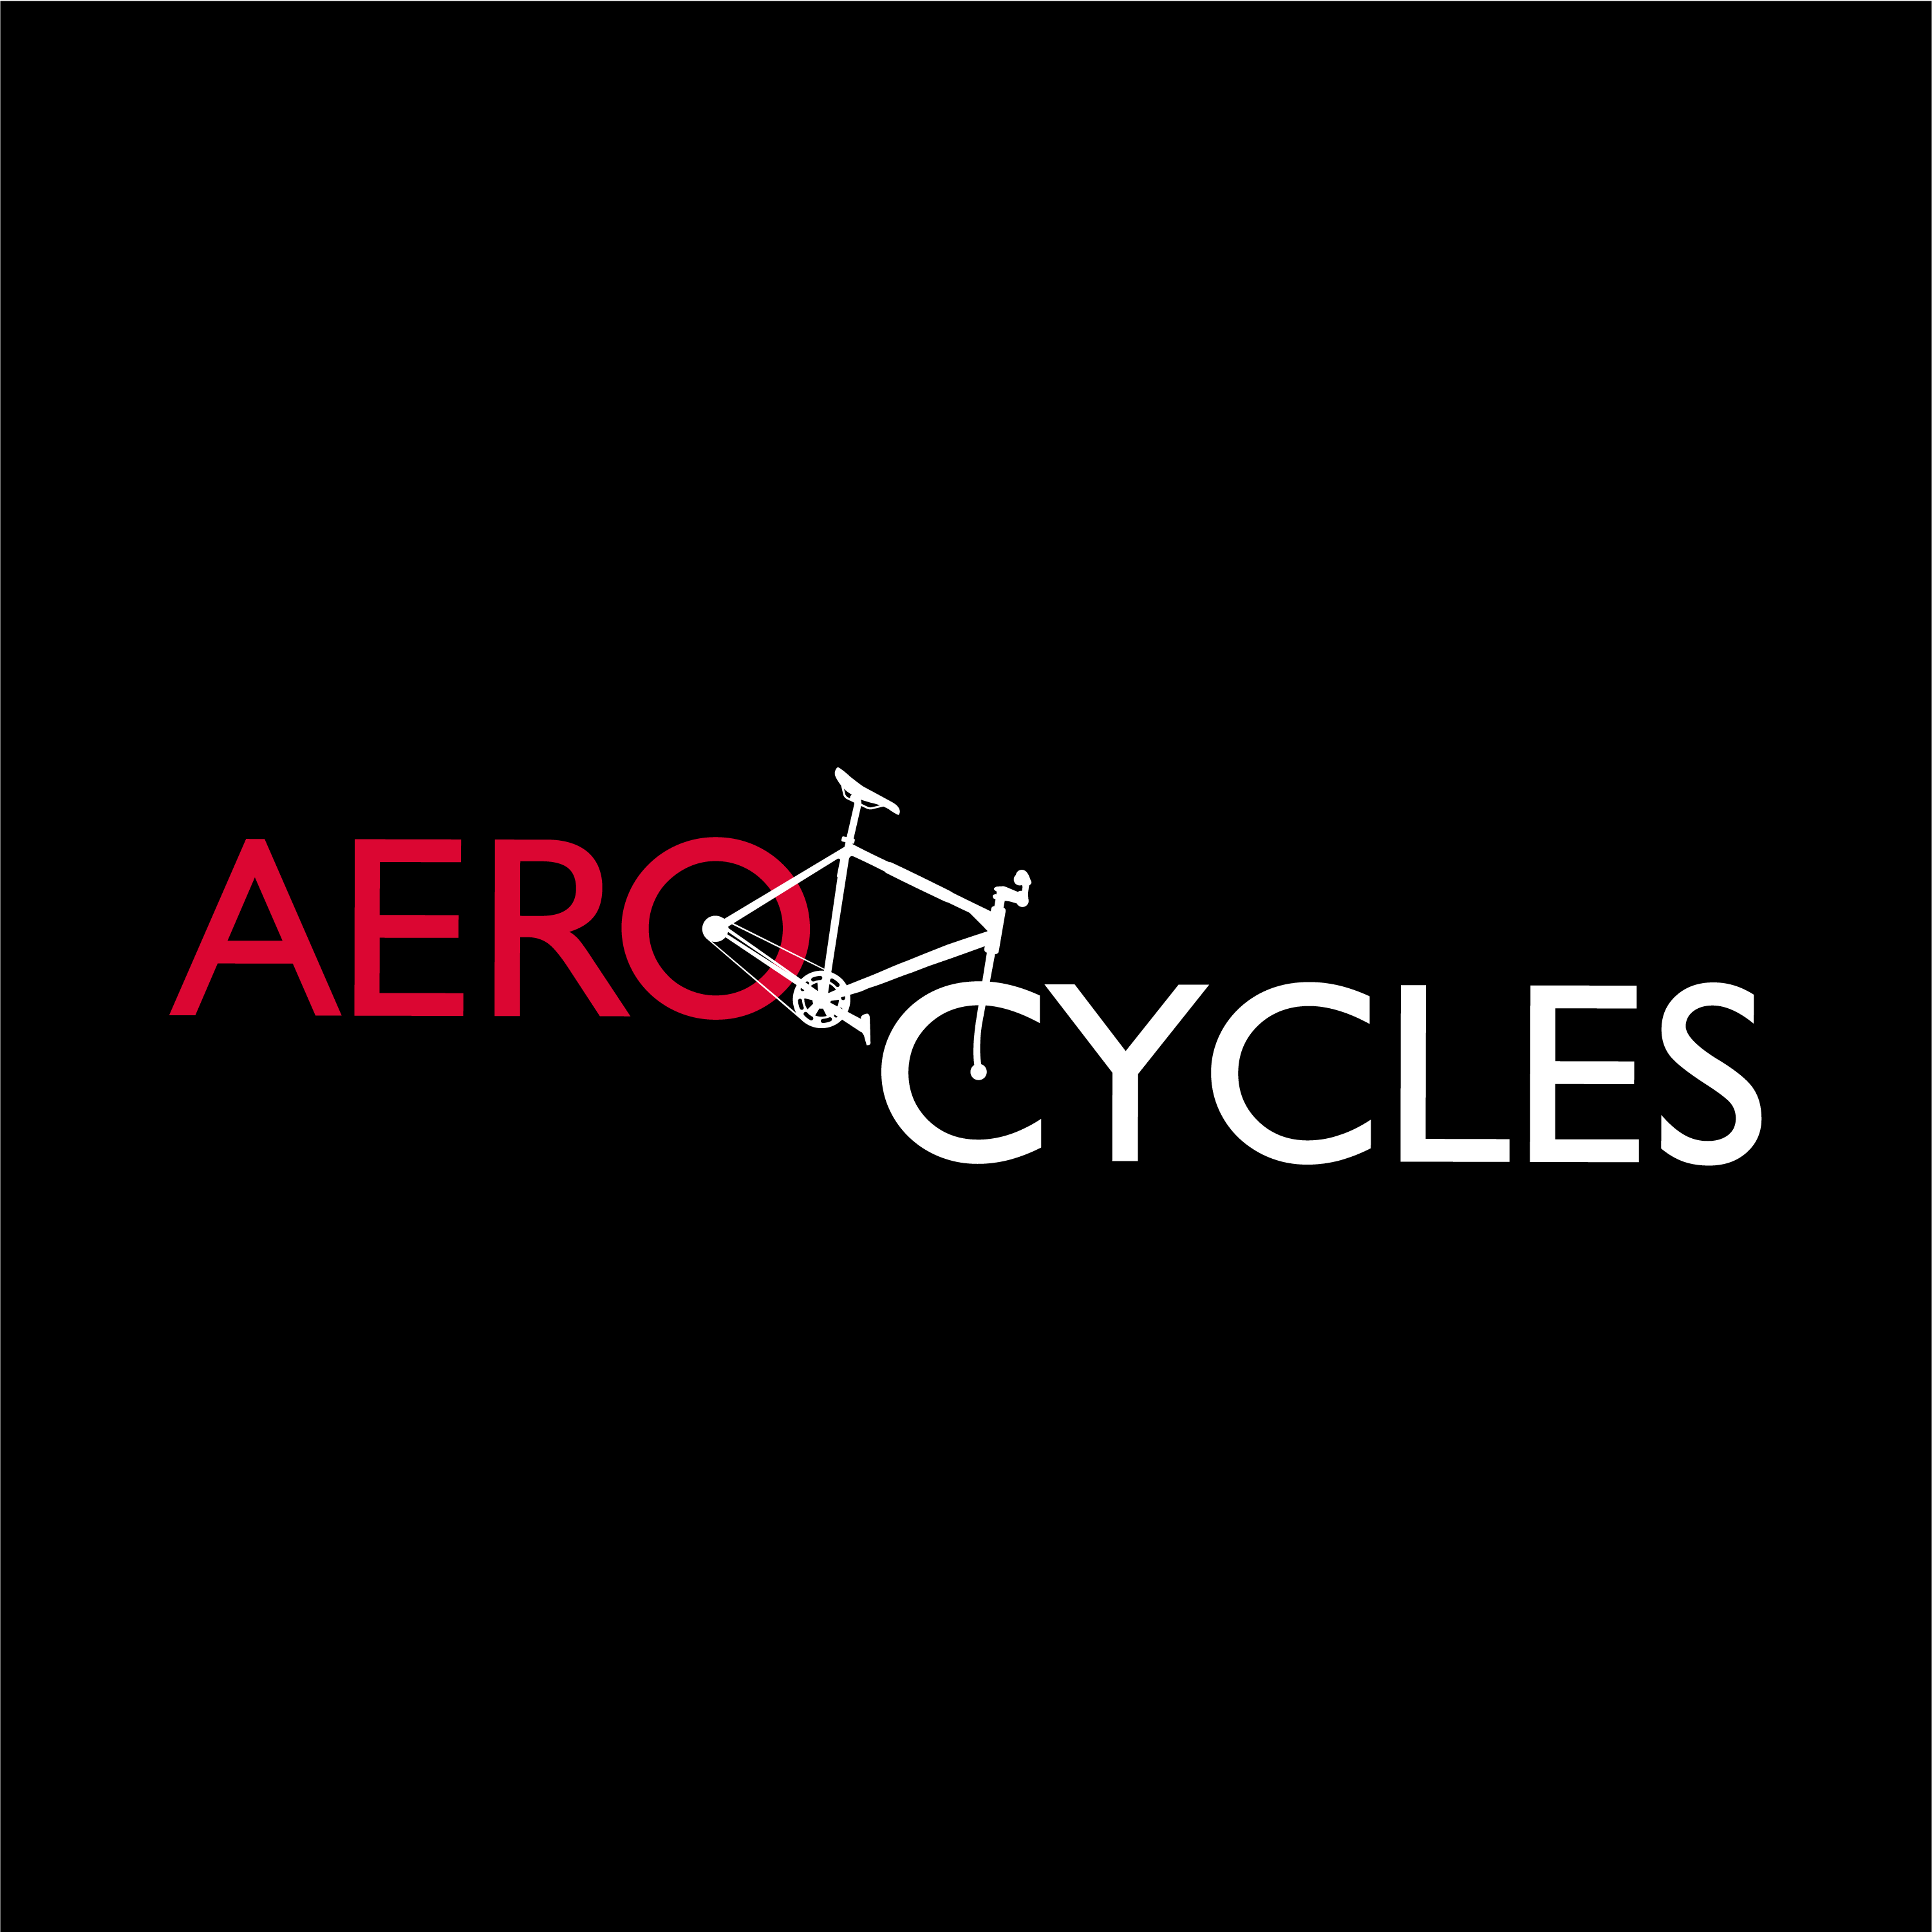 Club Image for TEAM AEROCYCLES